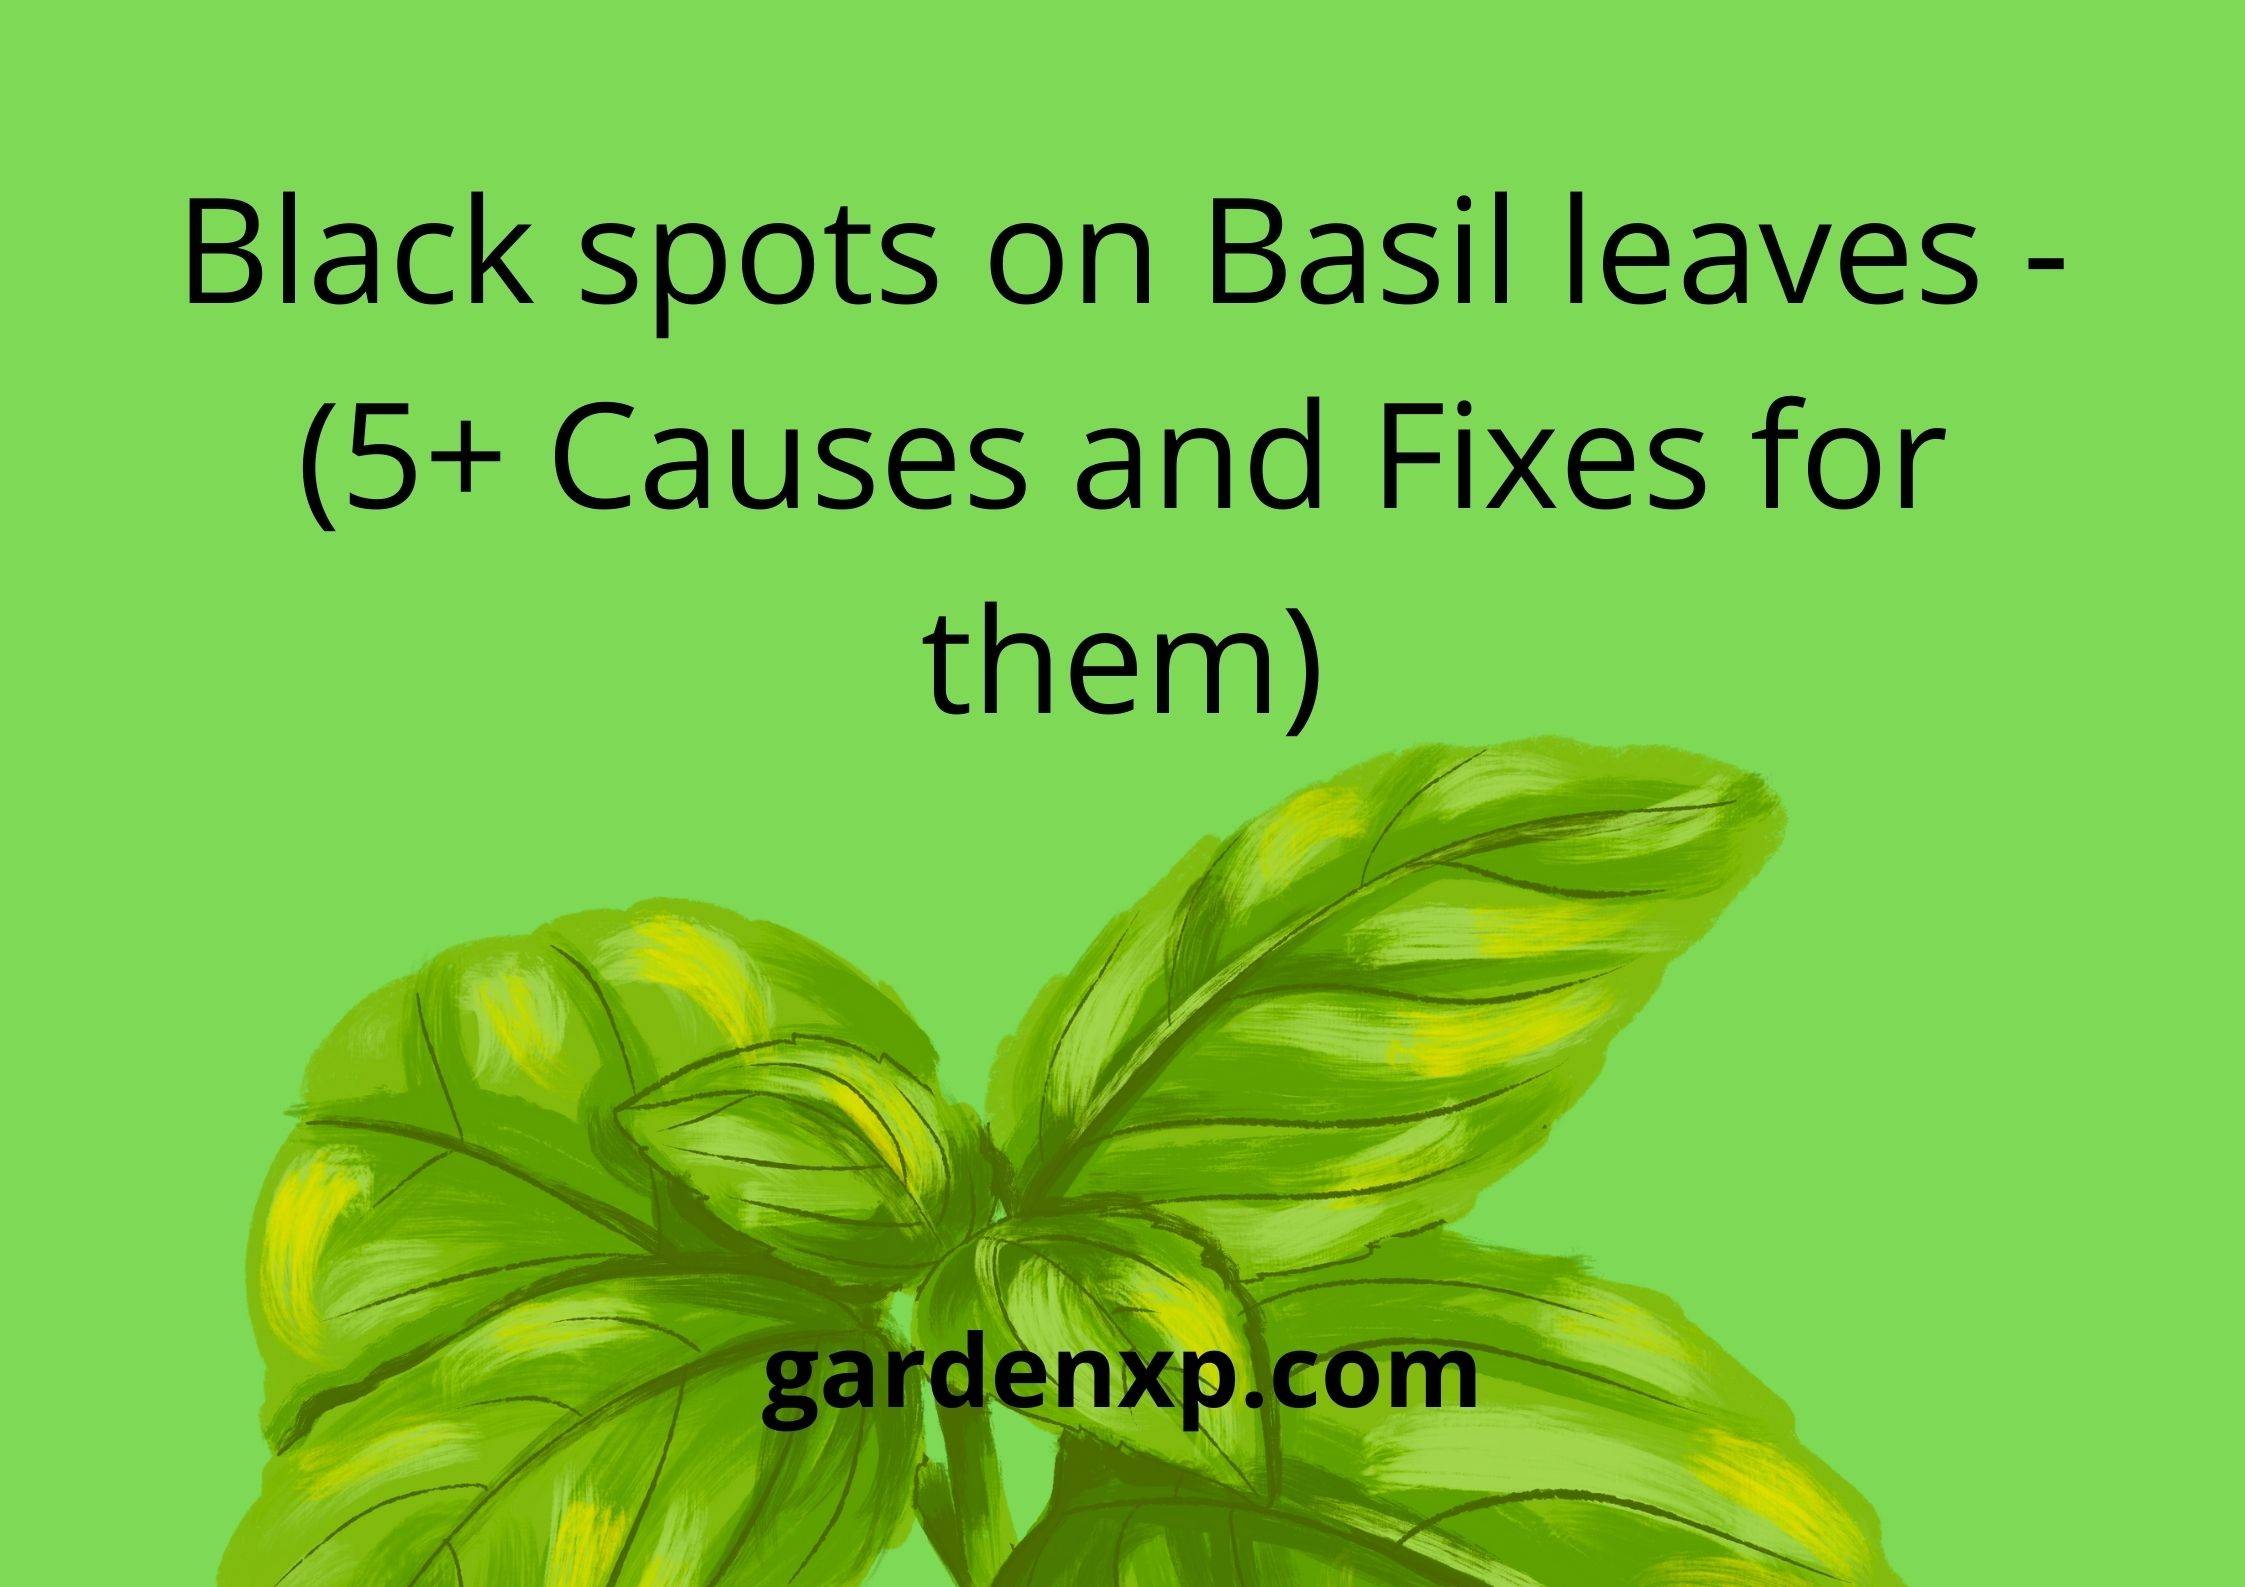 Black spots on Basil leaves -(5+ Causes and Fixes for them)